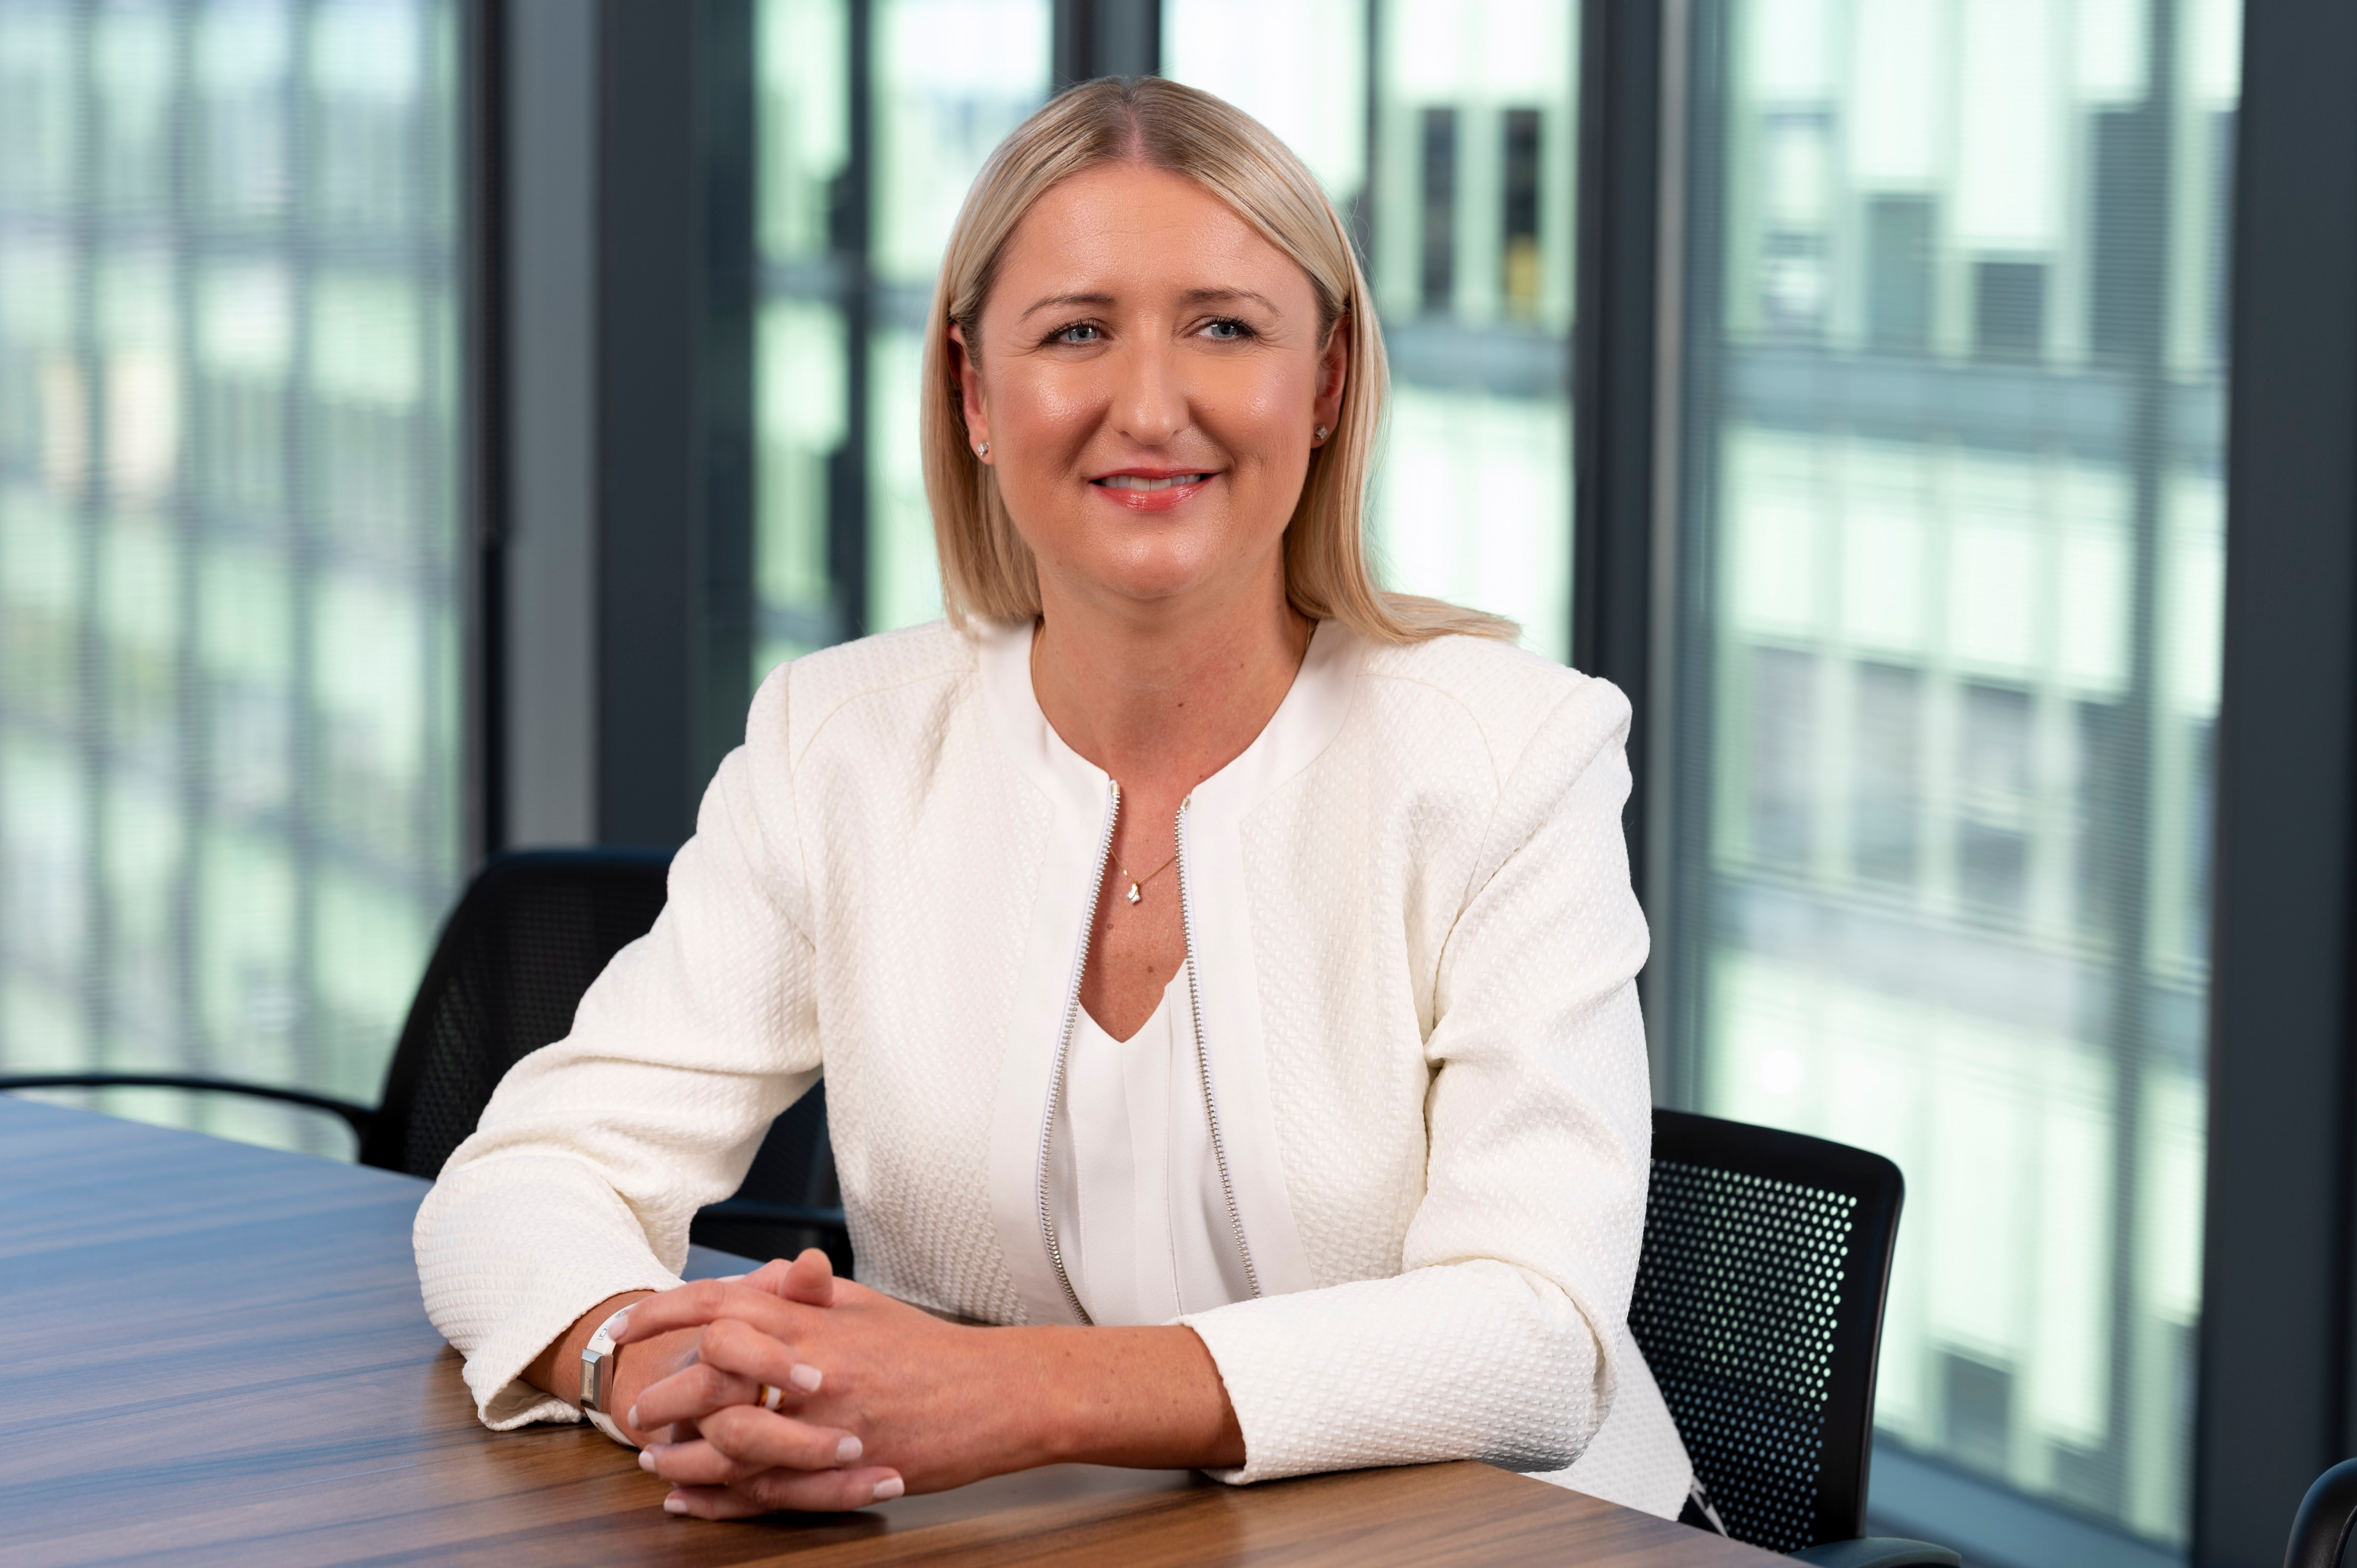 Ann Frances Cooney, of the law firm DWF, said employers were doing their best to meet the demands for higher pay